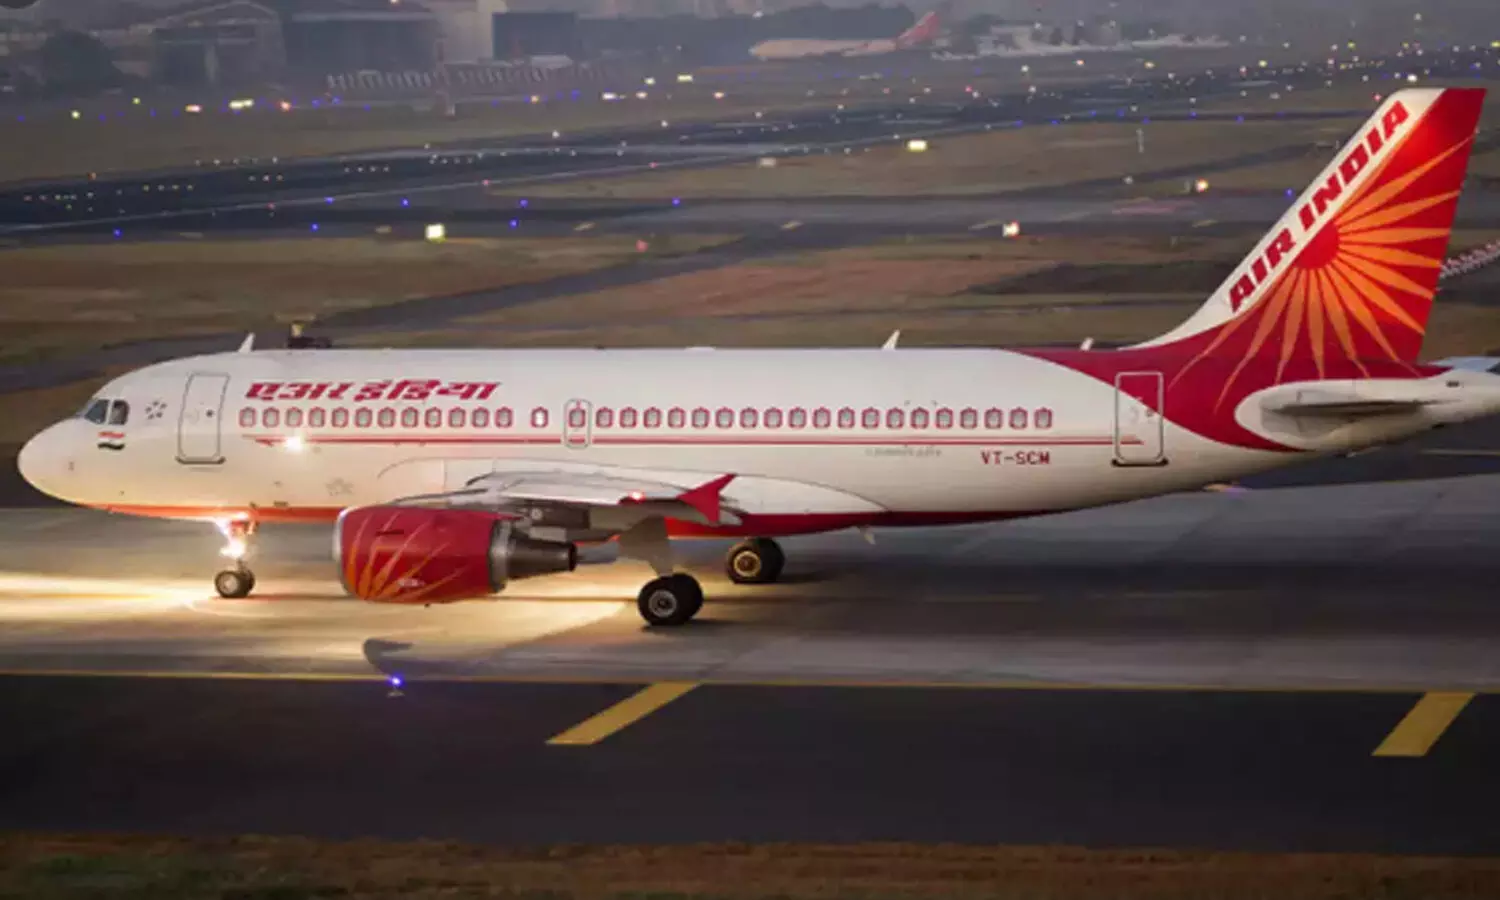 Air India flights from and to UK cancelled between April 24-30 amid COVID curbs